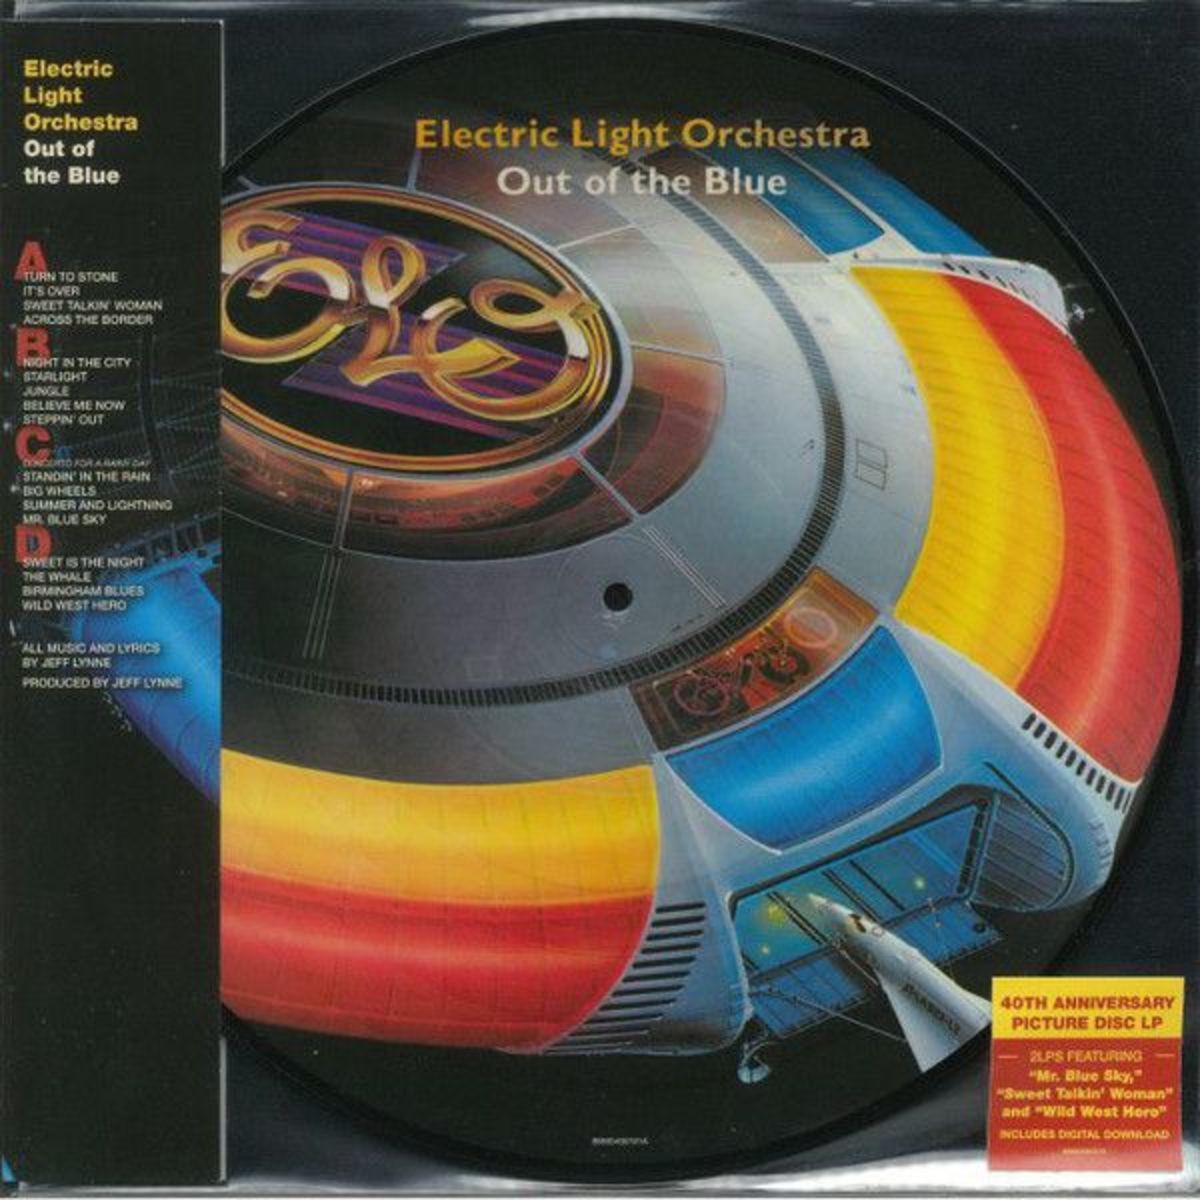 Blue light orchestra. Electric Light Orchestra - out of the Blue Vinyl 2lp конверт. Electric Light Orchestra time (винил). Electric Light Orchestra пластинки. Electric Light Orchestra out of the Blue 1977.